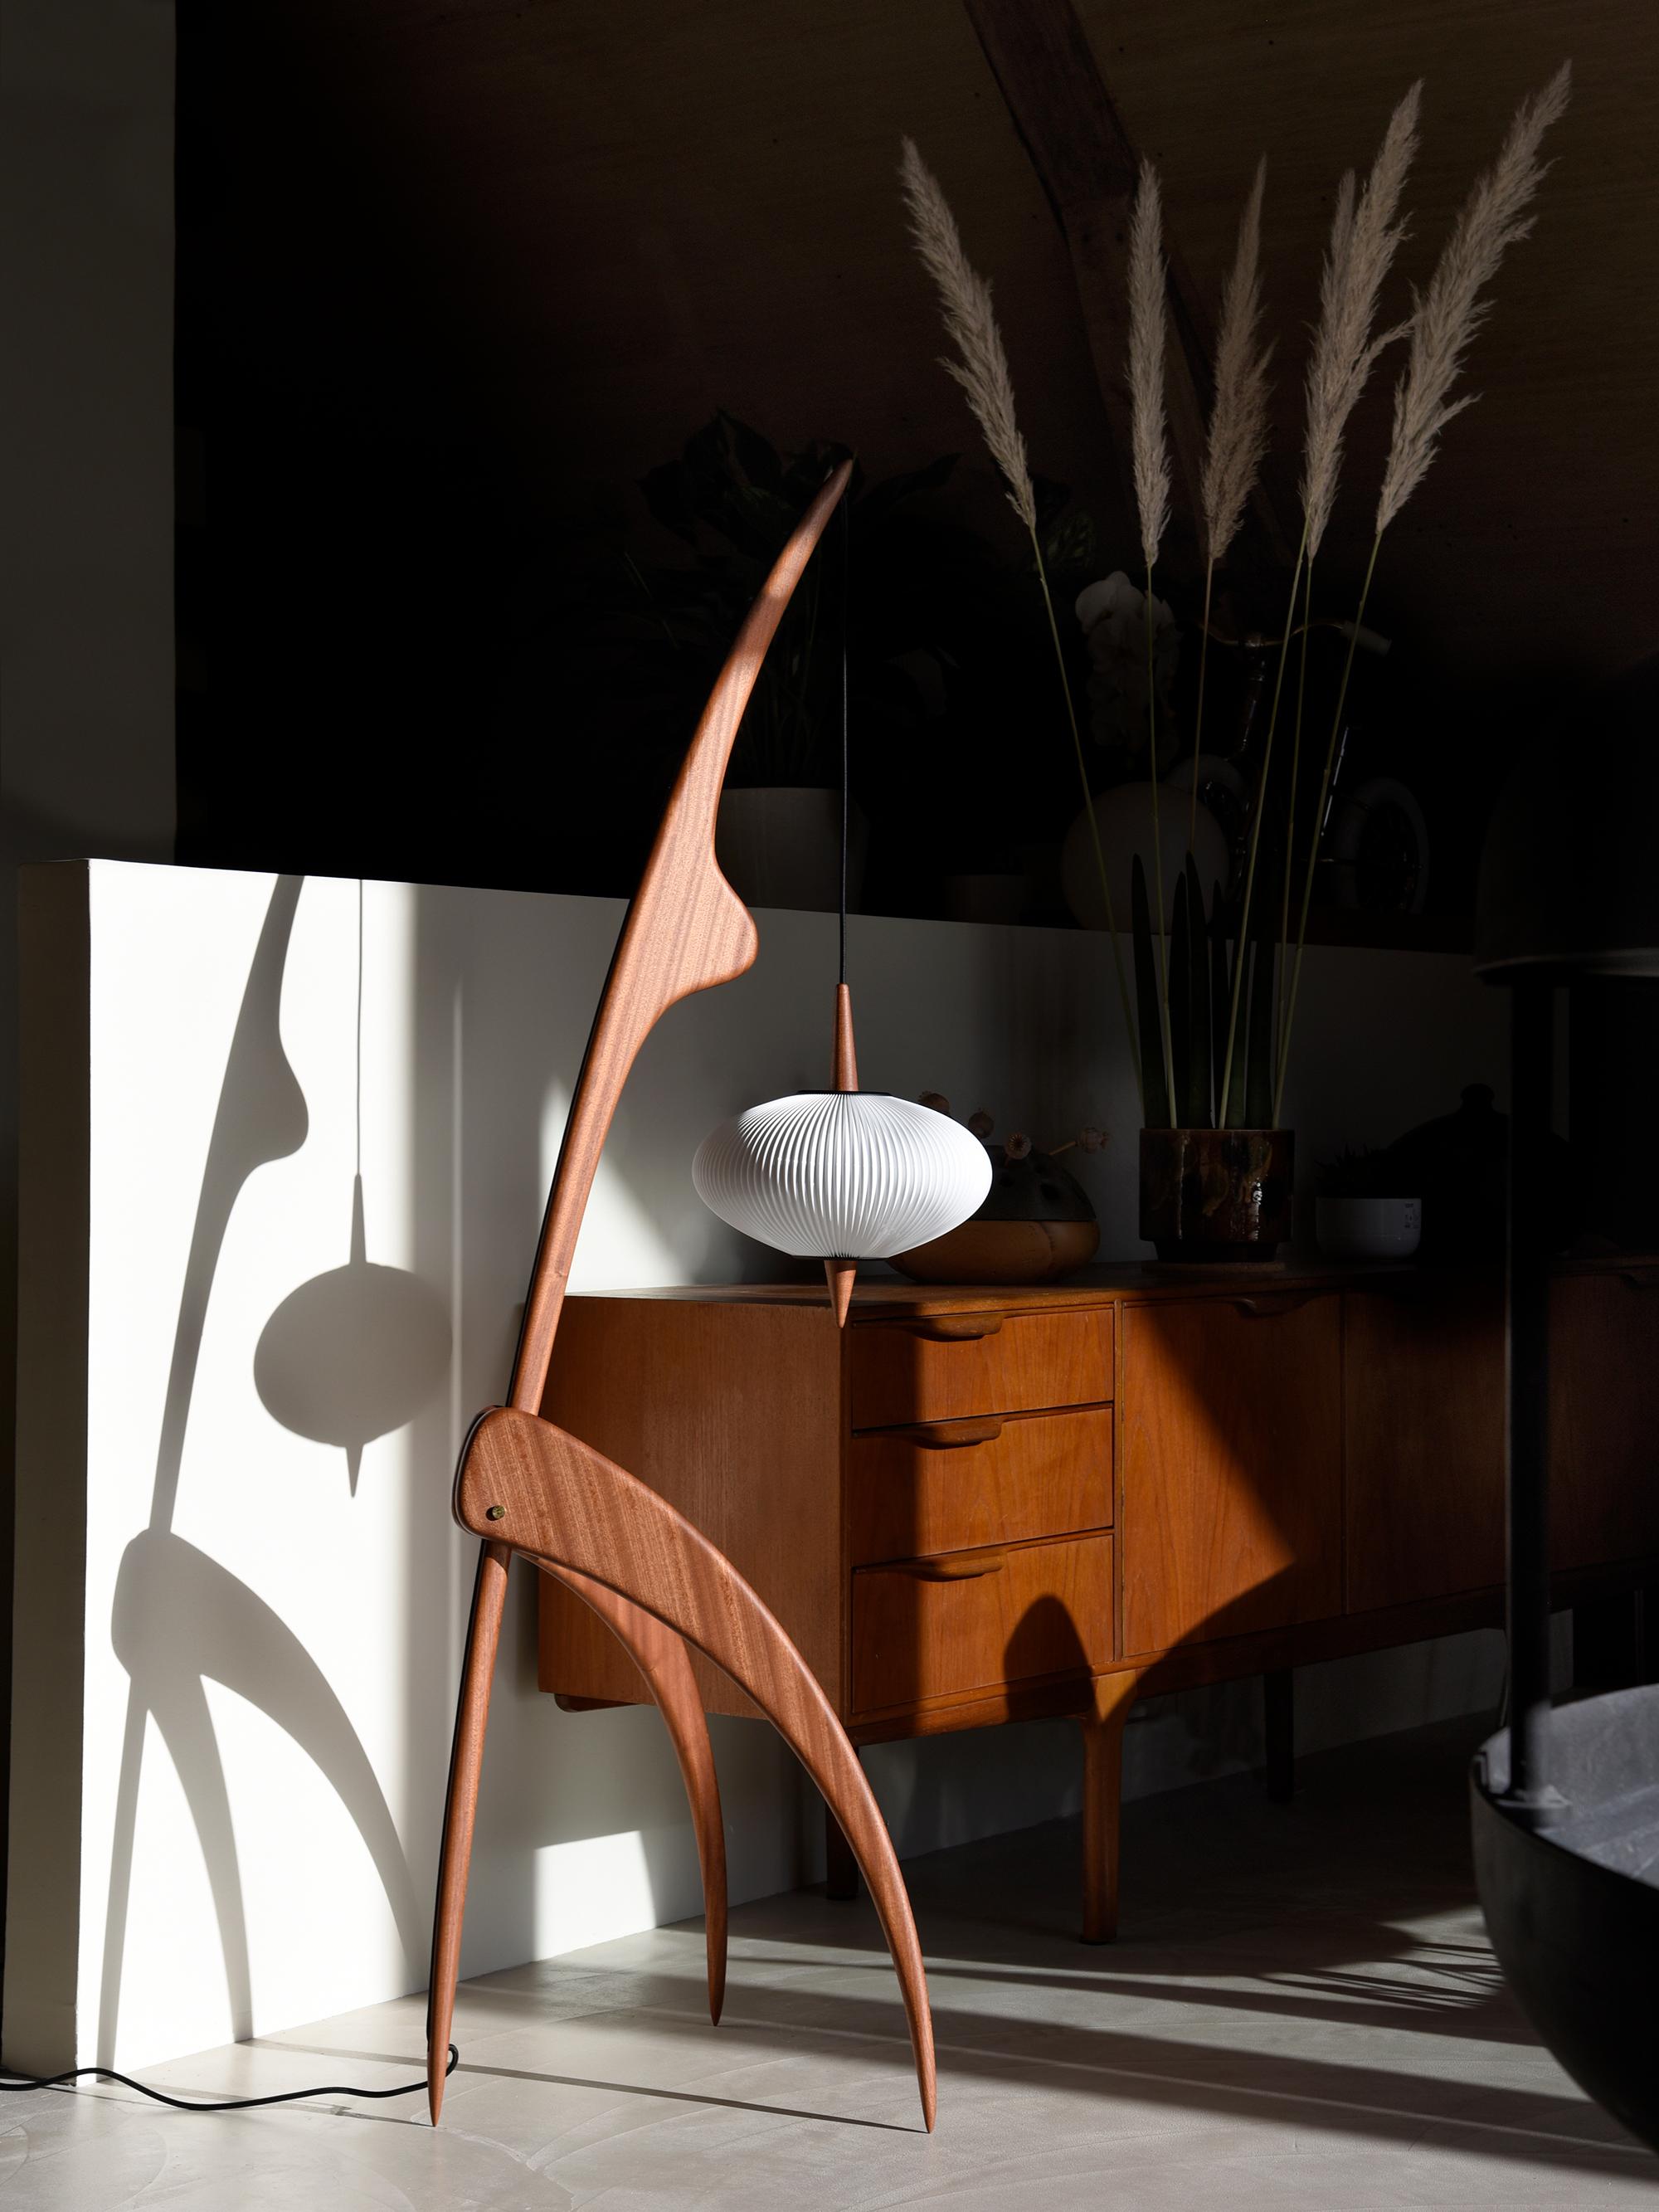 Large Rispal 'Praying Mantis' Sculptural Floor Lamp in Mahogany.

The iconic model #14.950 was originally designed in 1950 by François Rispal. This newly produced authorized re-edition is executed in richly grained mahogany with a signed 